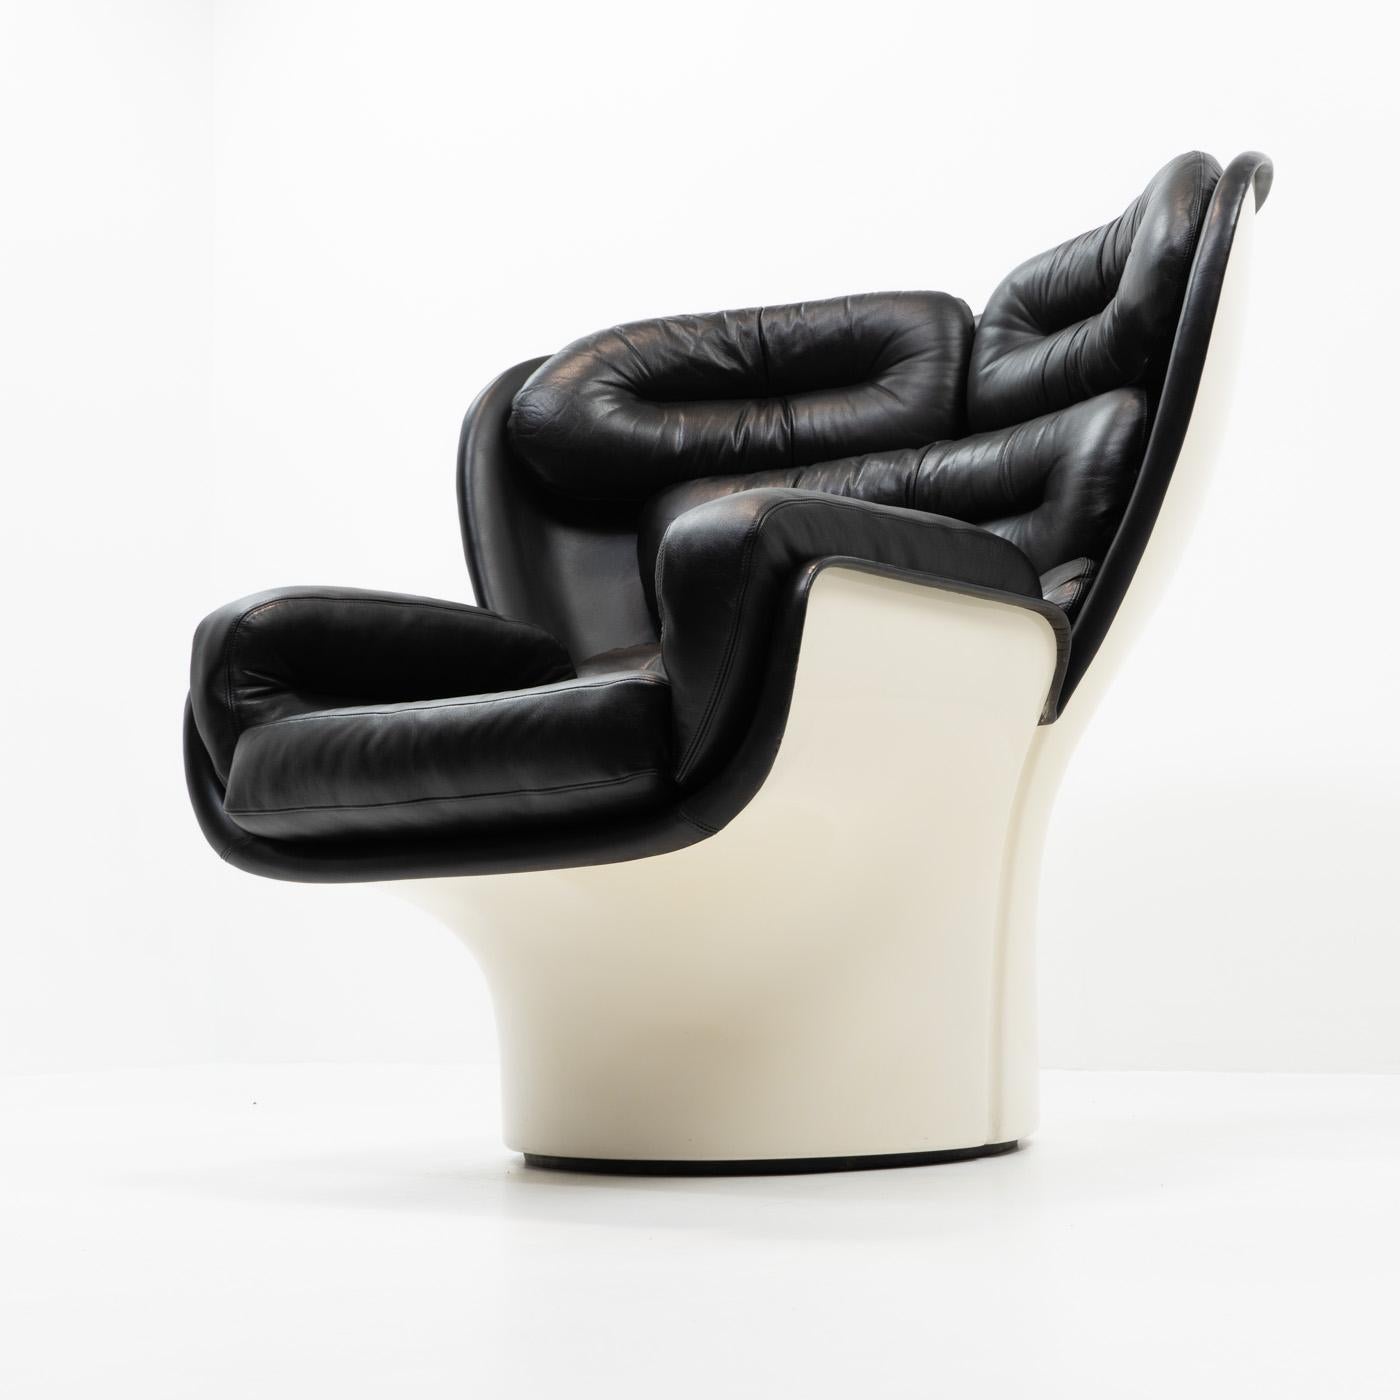 Leather Italian Design Classic Elda Lounge Chair by Joe Colombo, 1970s Italy For Sale